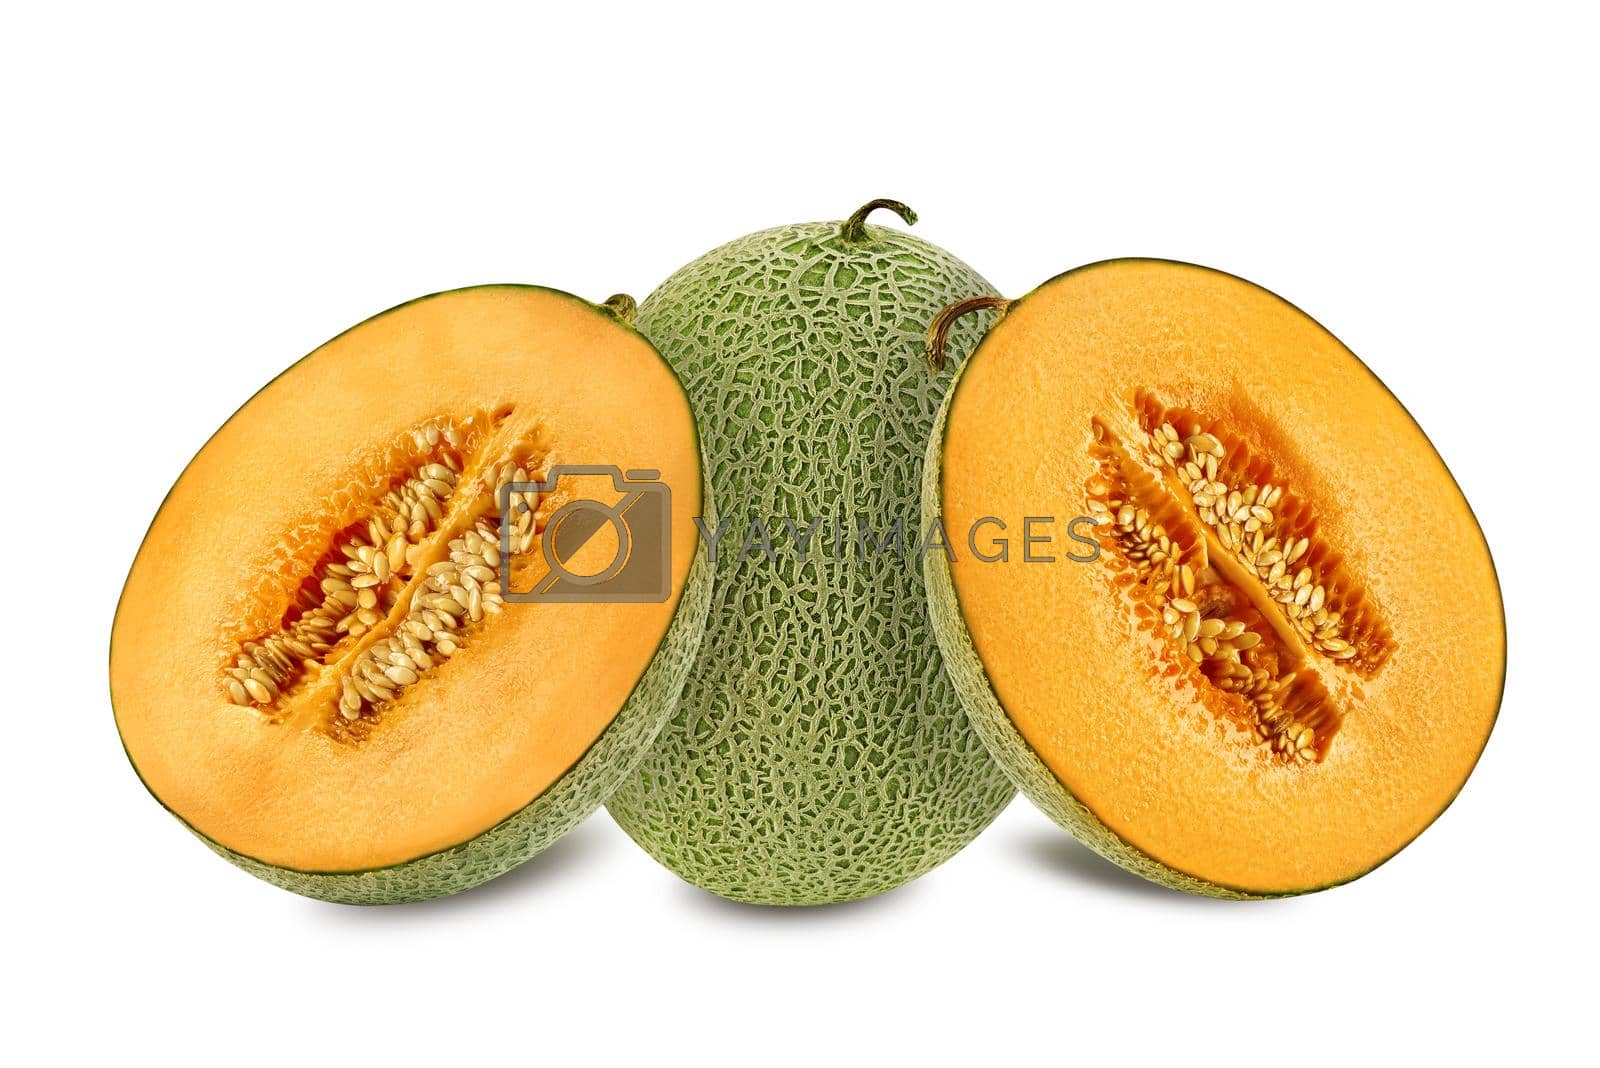 Royalty free image of Delicious cantaloupe melon in a cross-section, isolated on white background with copy space for text or images. Side view. Close-up shot. by nazarovsergey